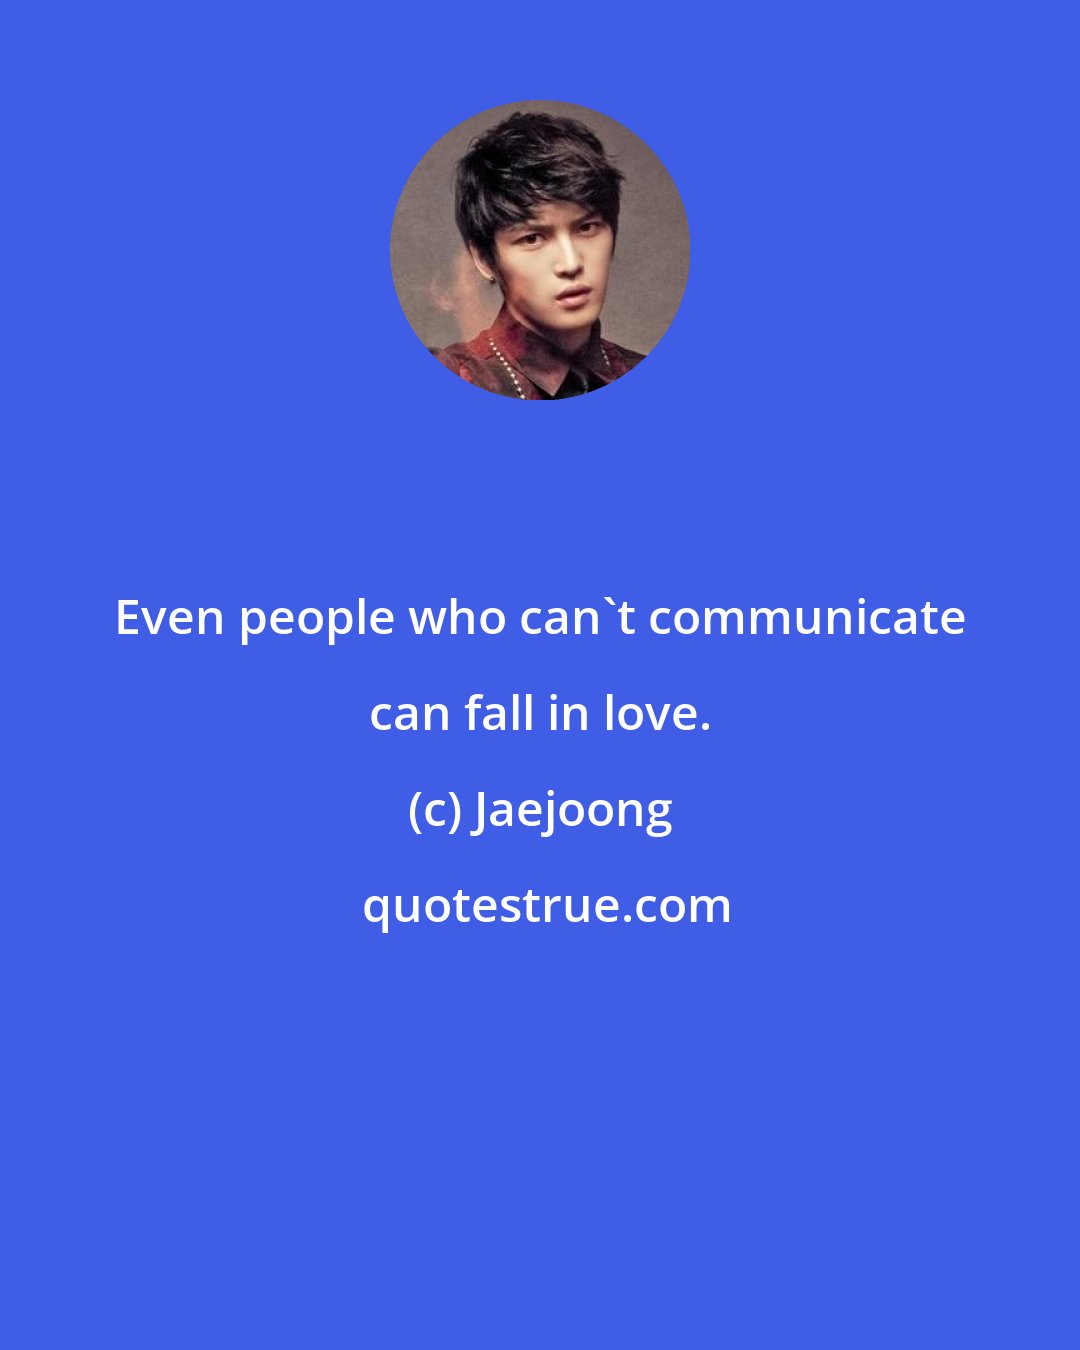 Jaejoong: Even people who can't communicate can fall in love.